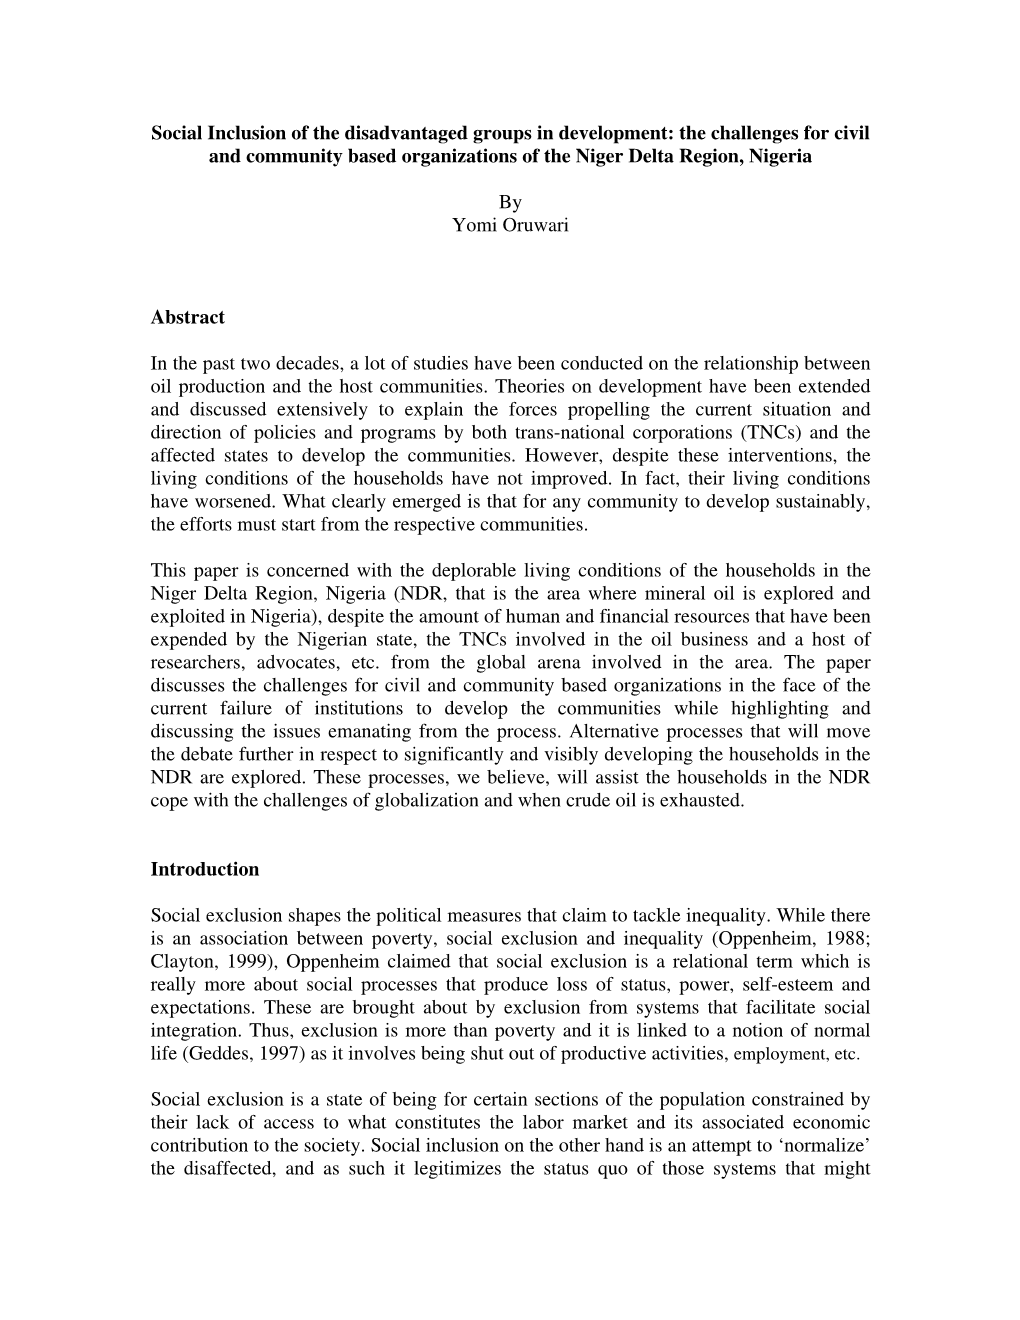 Social Inclusion of the Disadvantaged Groups in Development: the Challenges for Civil and Community Based Organizations of the Niger Delta Region, Nigeria